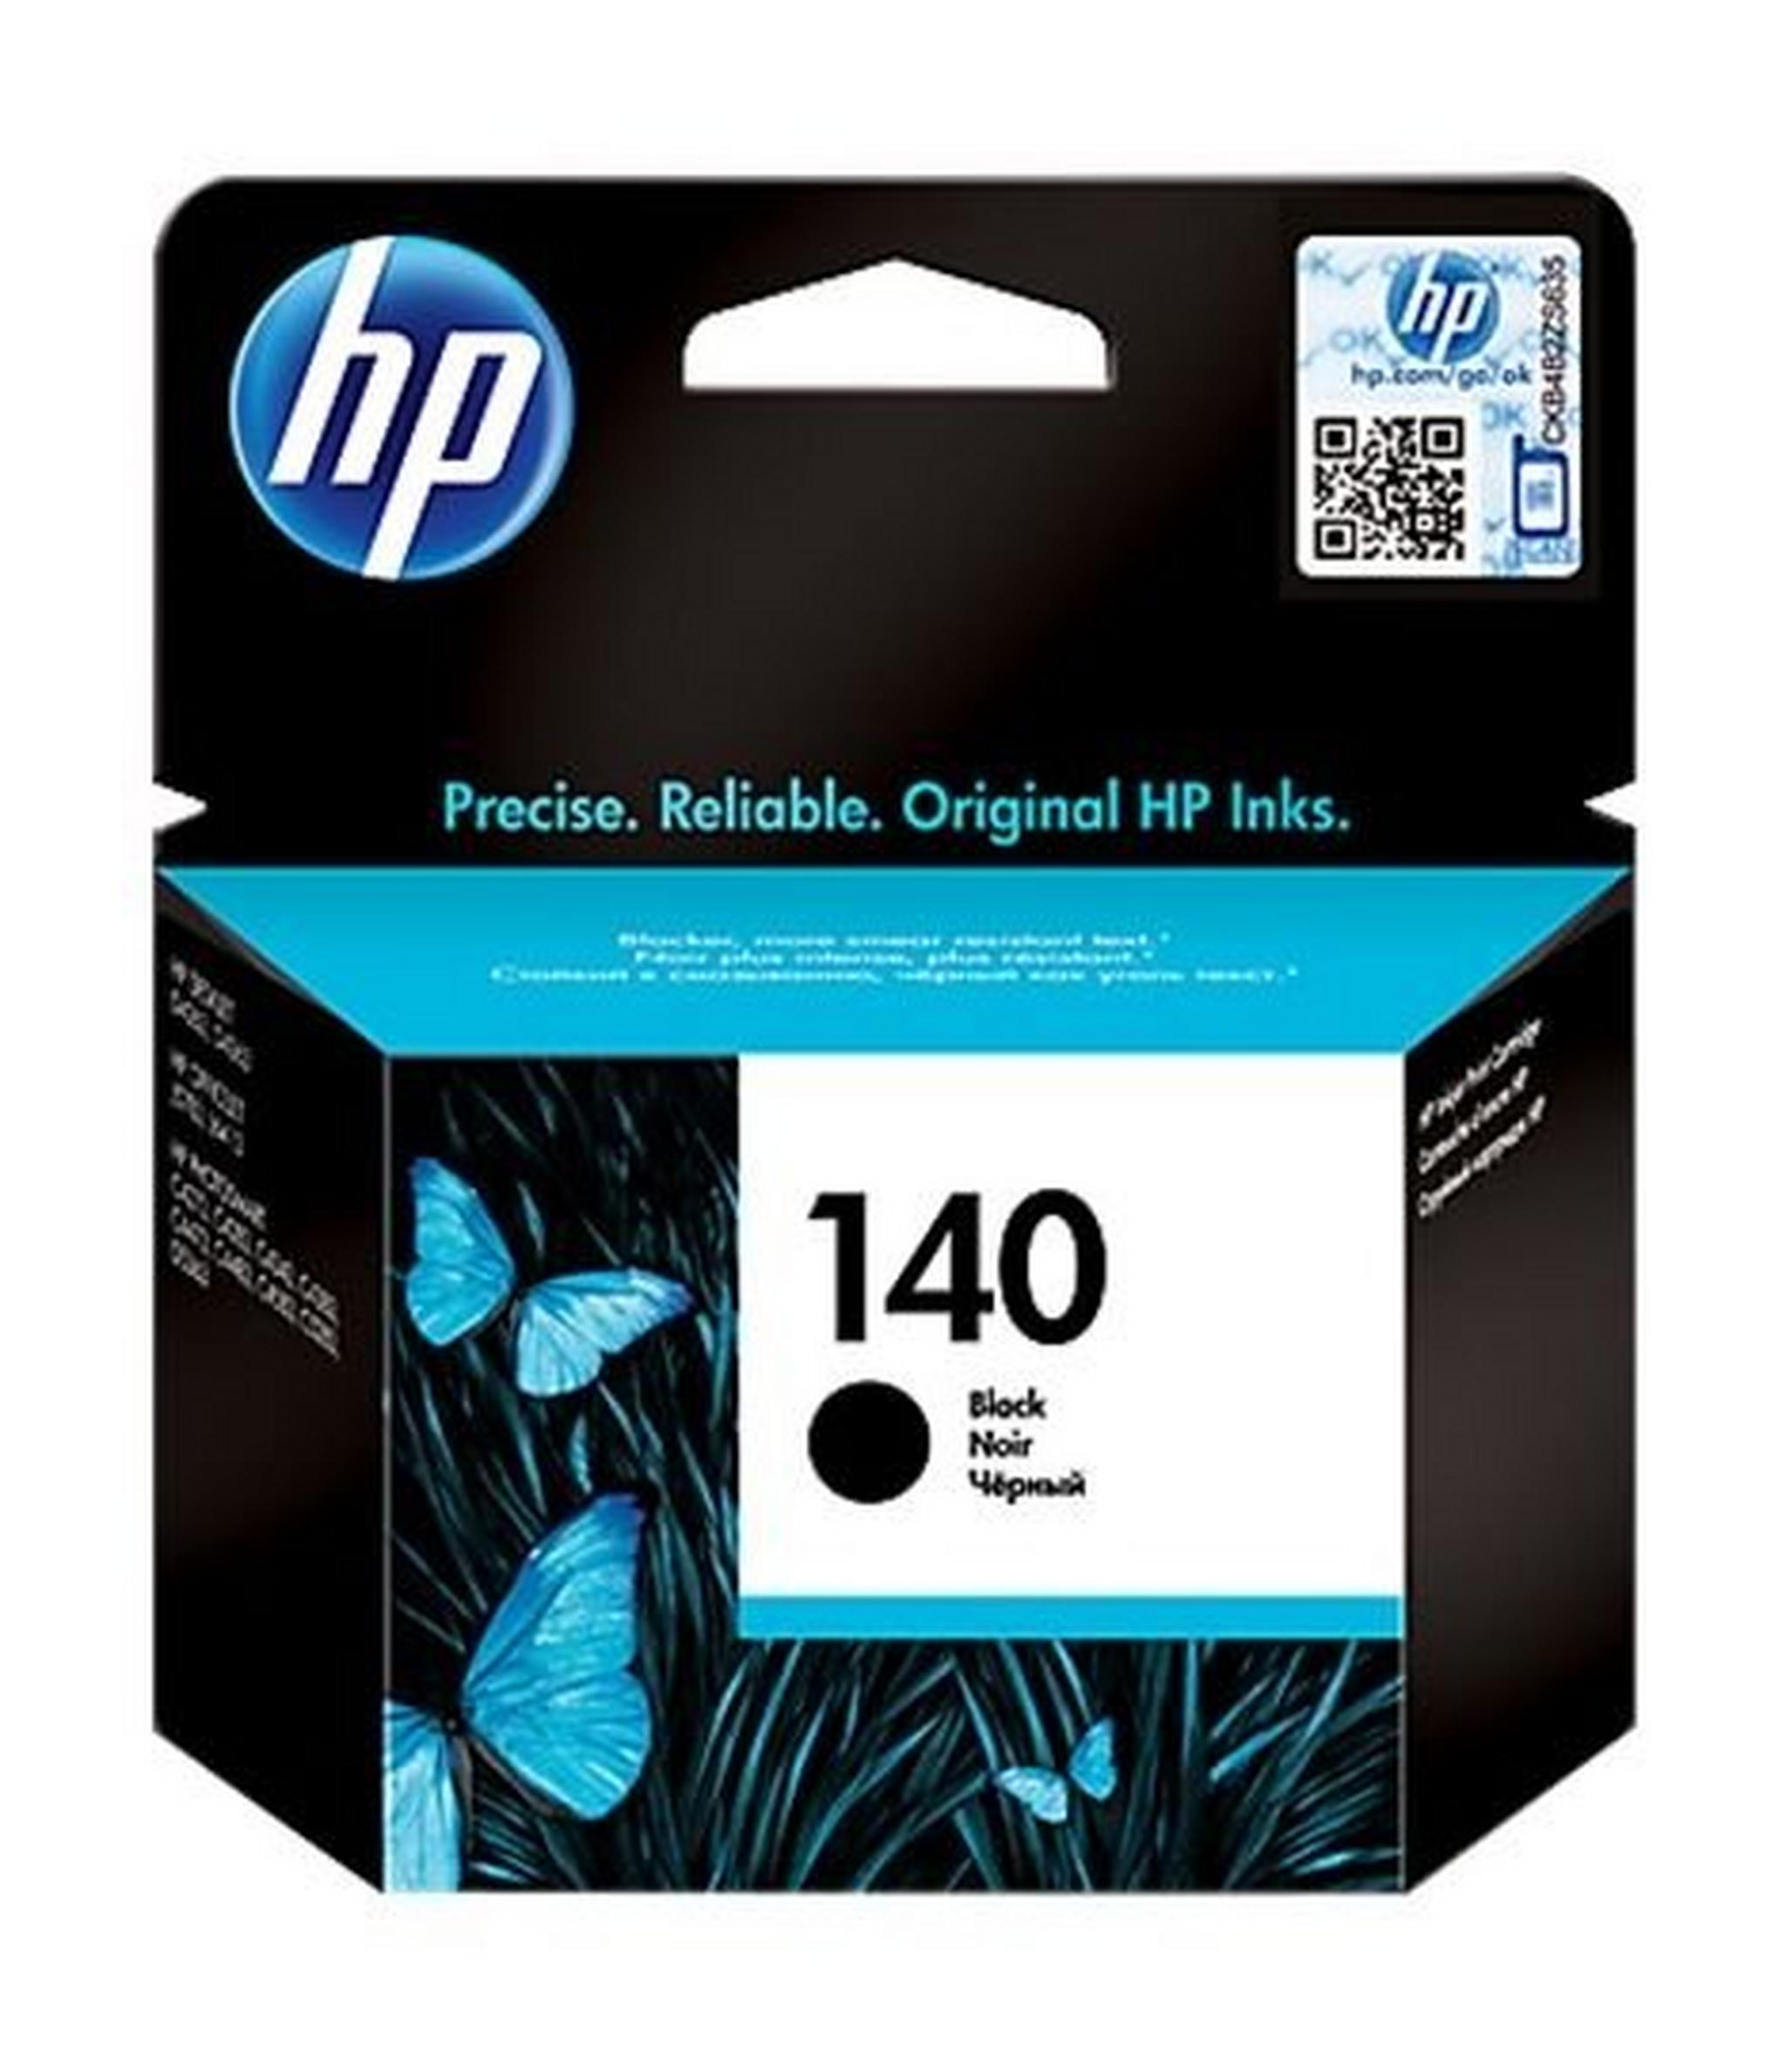 HP Ink 140 for Inkjet Printing 200 Page Yield - Black (Single Pack)